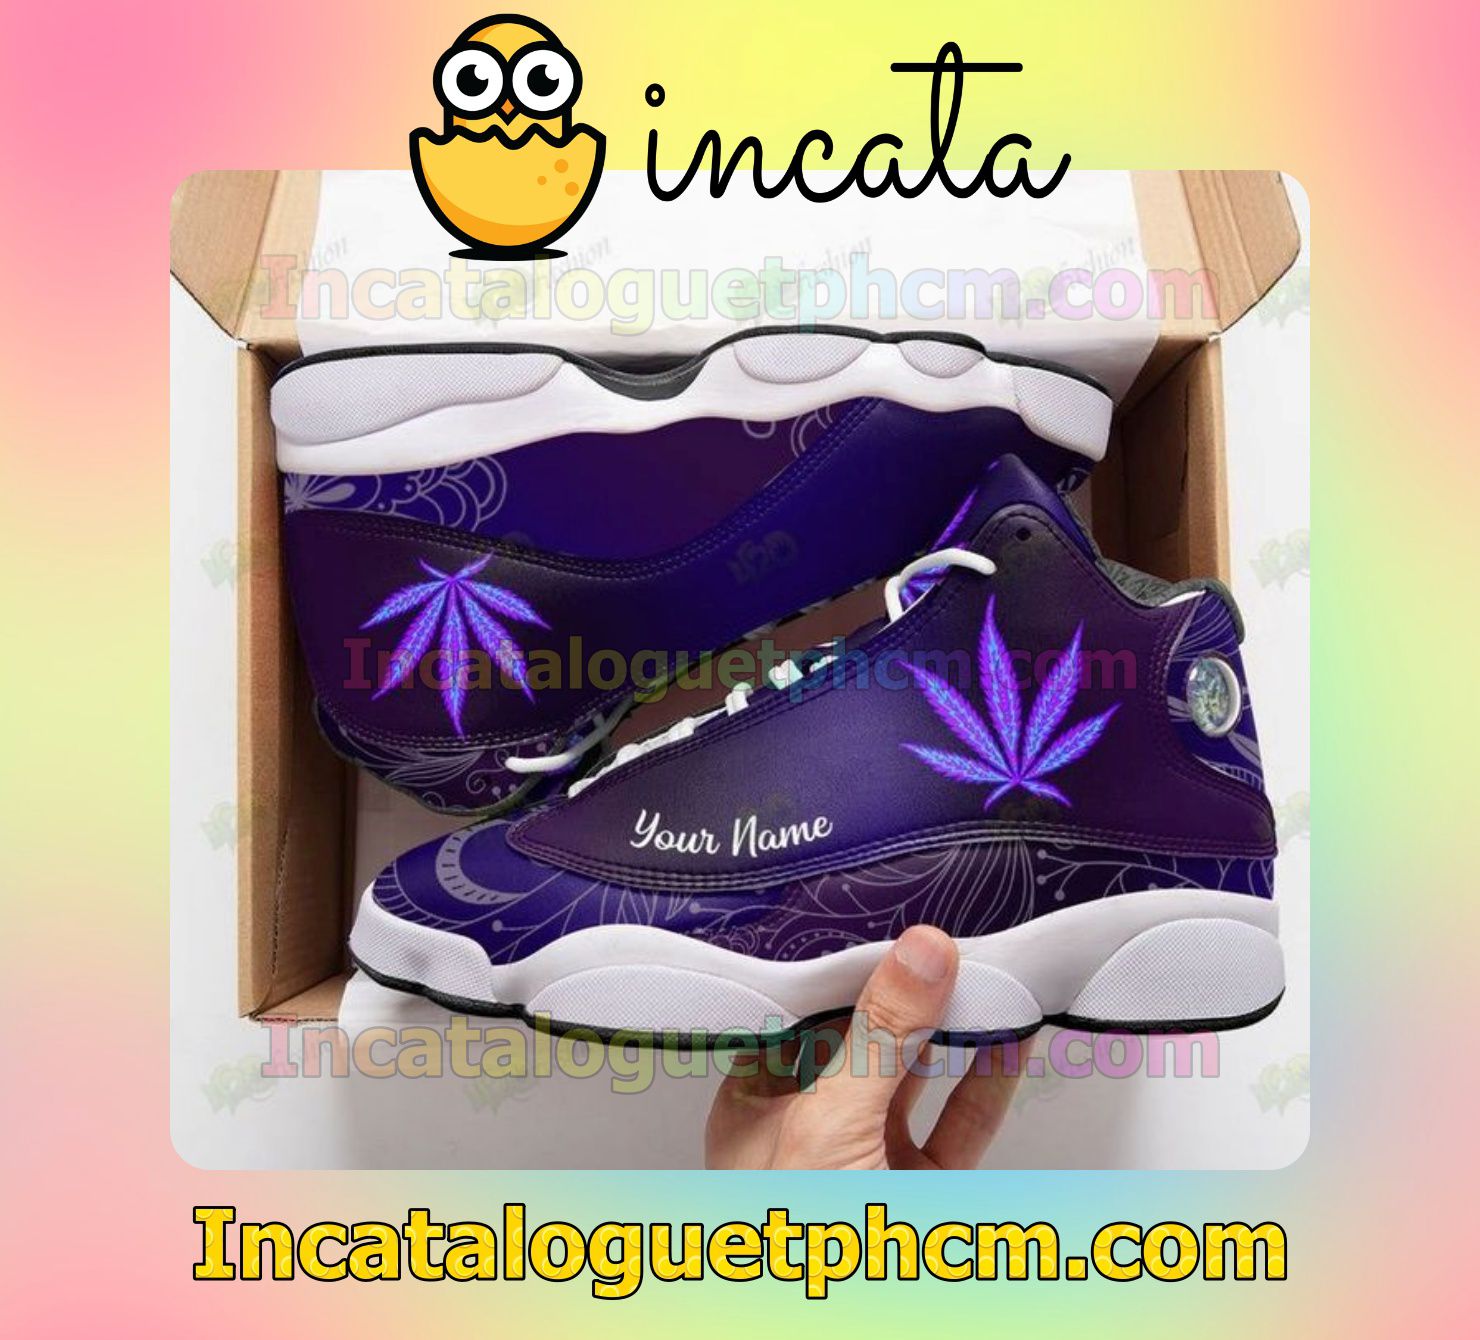 Personalized Weed Lsd Psychedelic Purple Jordans